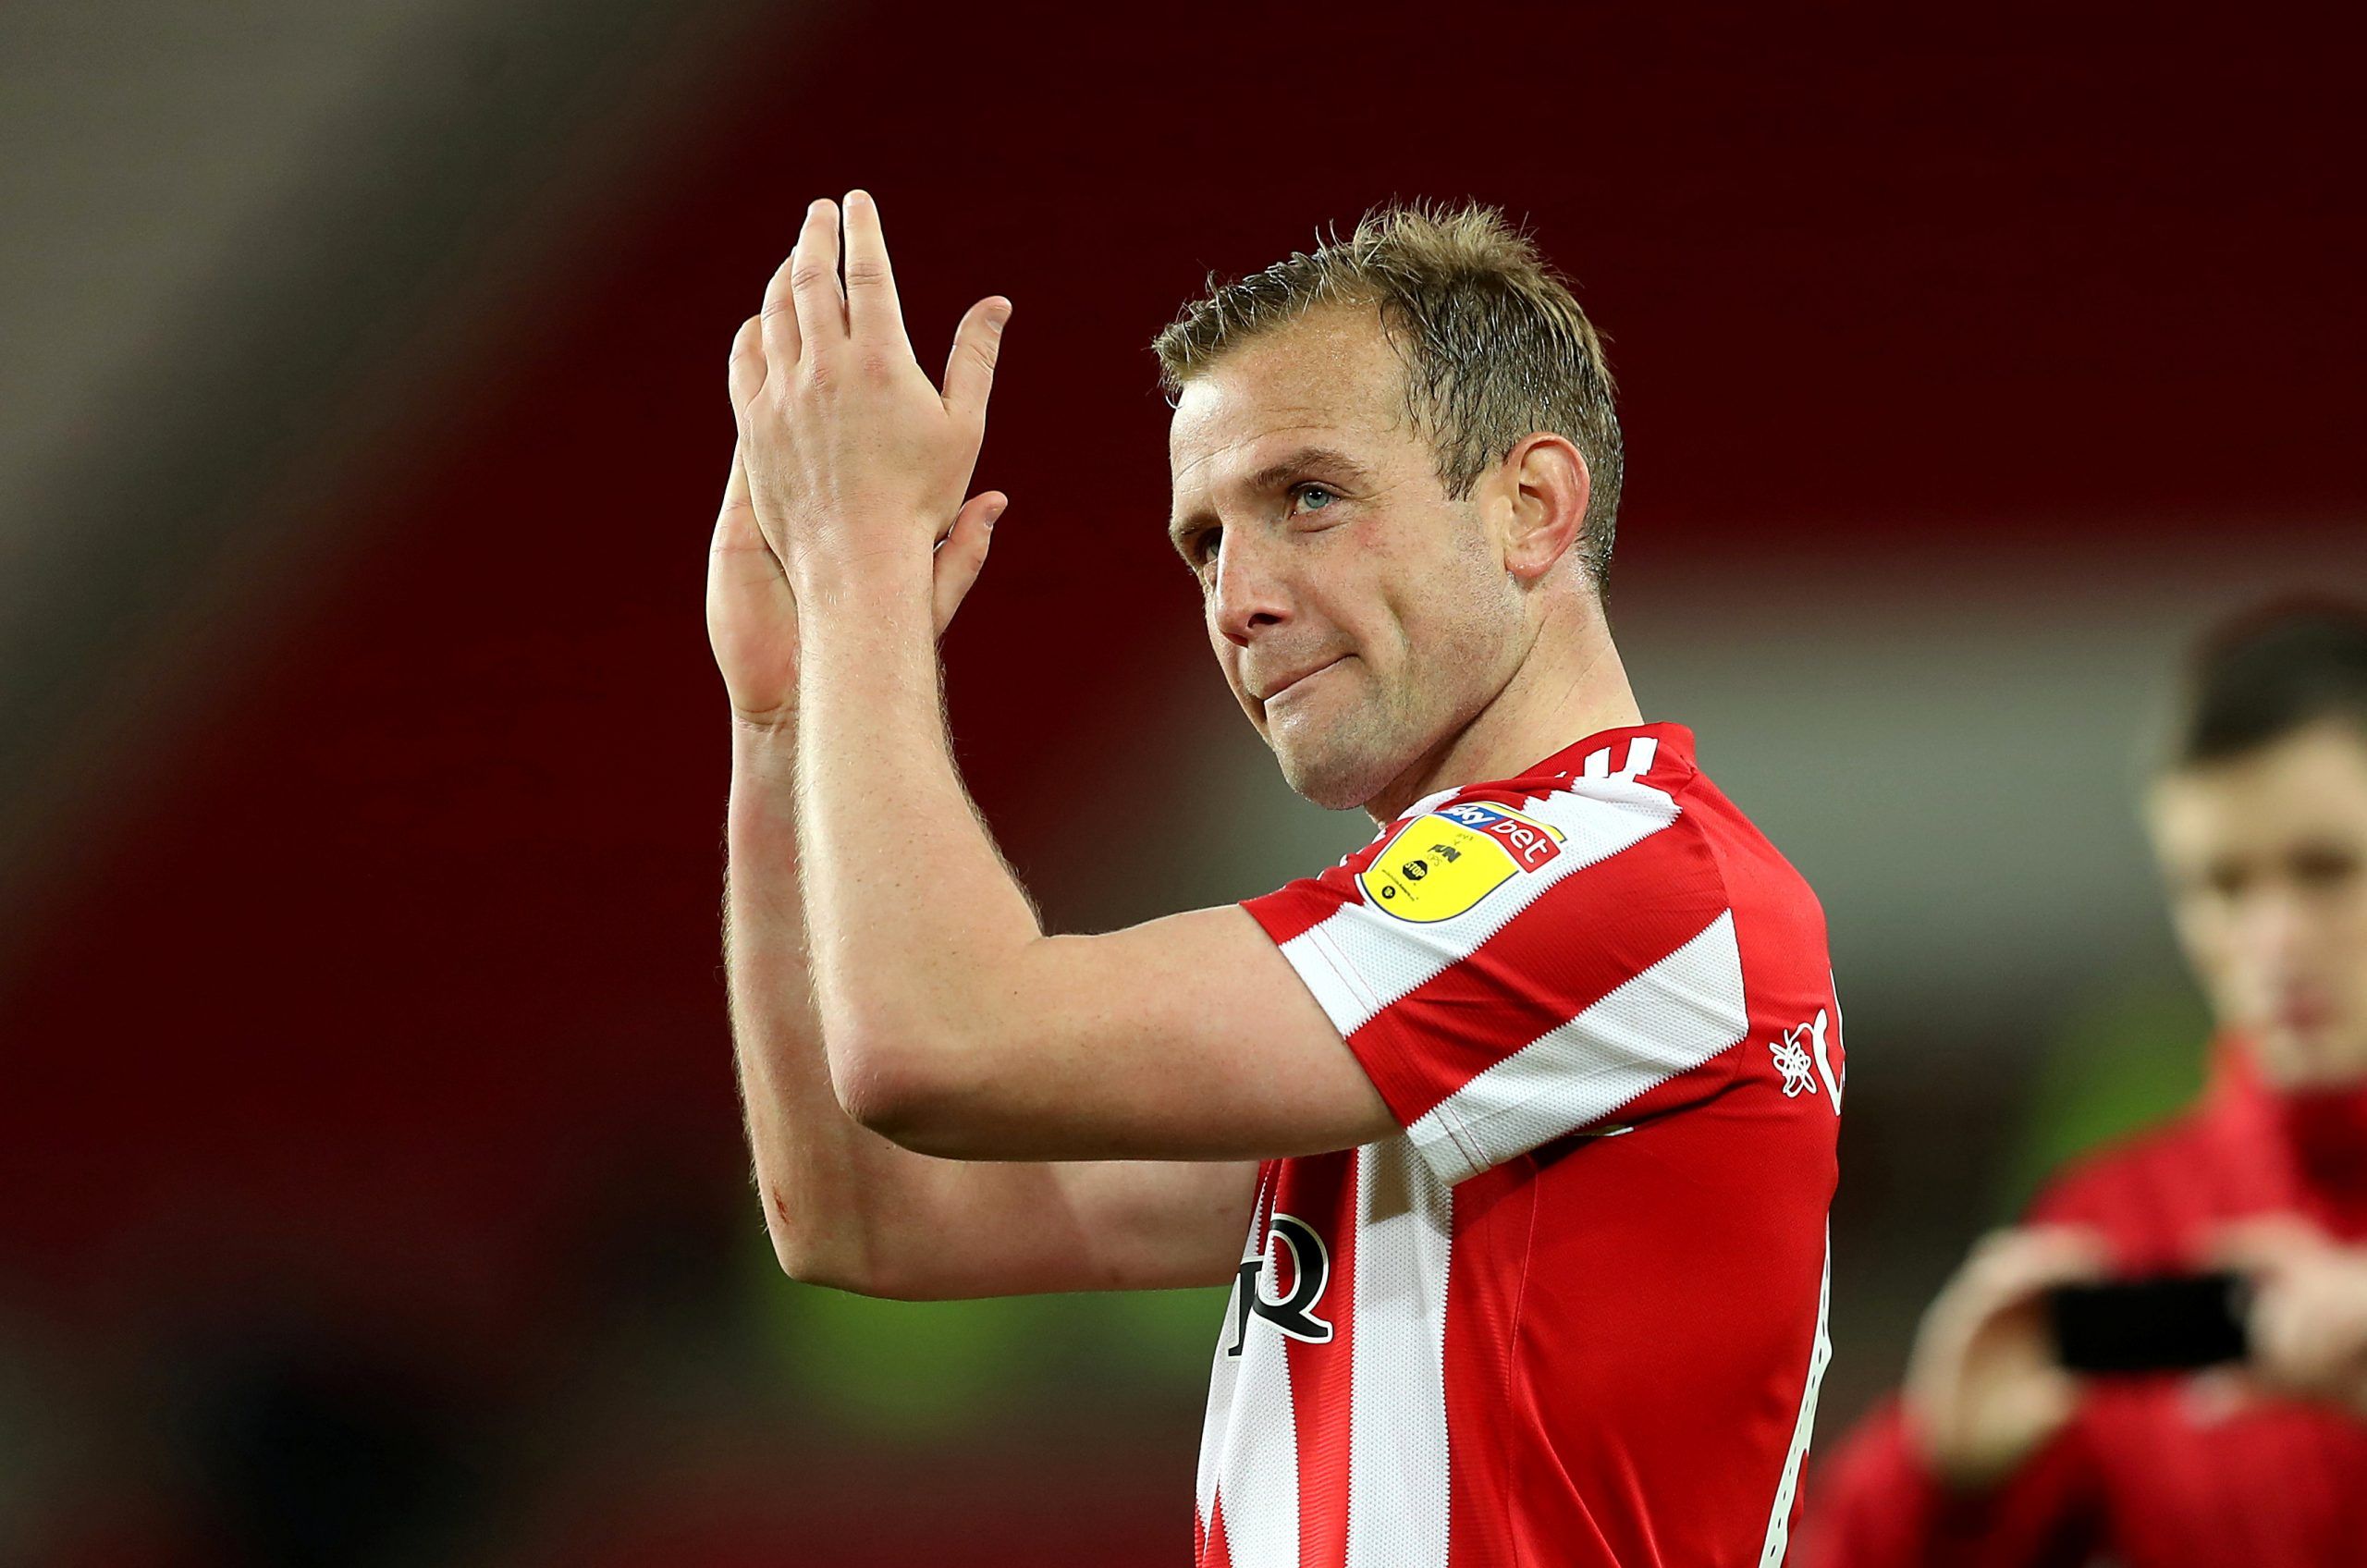 Soccer Football - League One Play-Off Semi Final First Leg - Sunderland v Portsmouth - Stadium of Light, Sunderland, Britain - May 11, 2019   Sunderland's Lee Cattermole applauds fans after the match   Action Images/John Clifton    EDITORIAL USE ONLY. No use with unauthorized audio, video, data, fixture lists, club/league logos or 